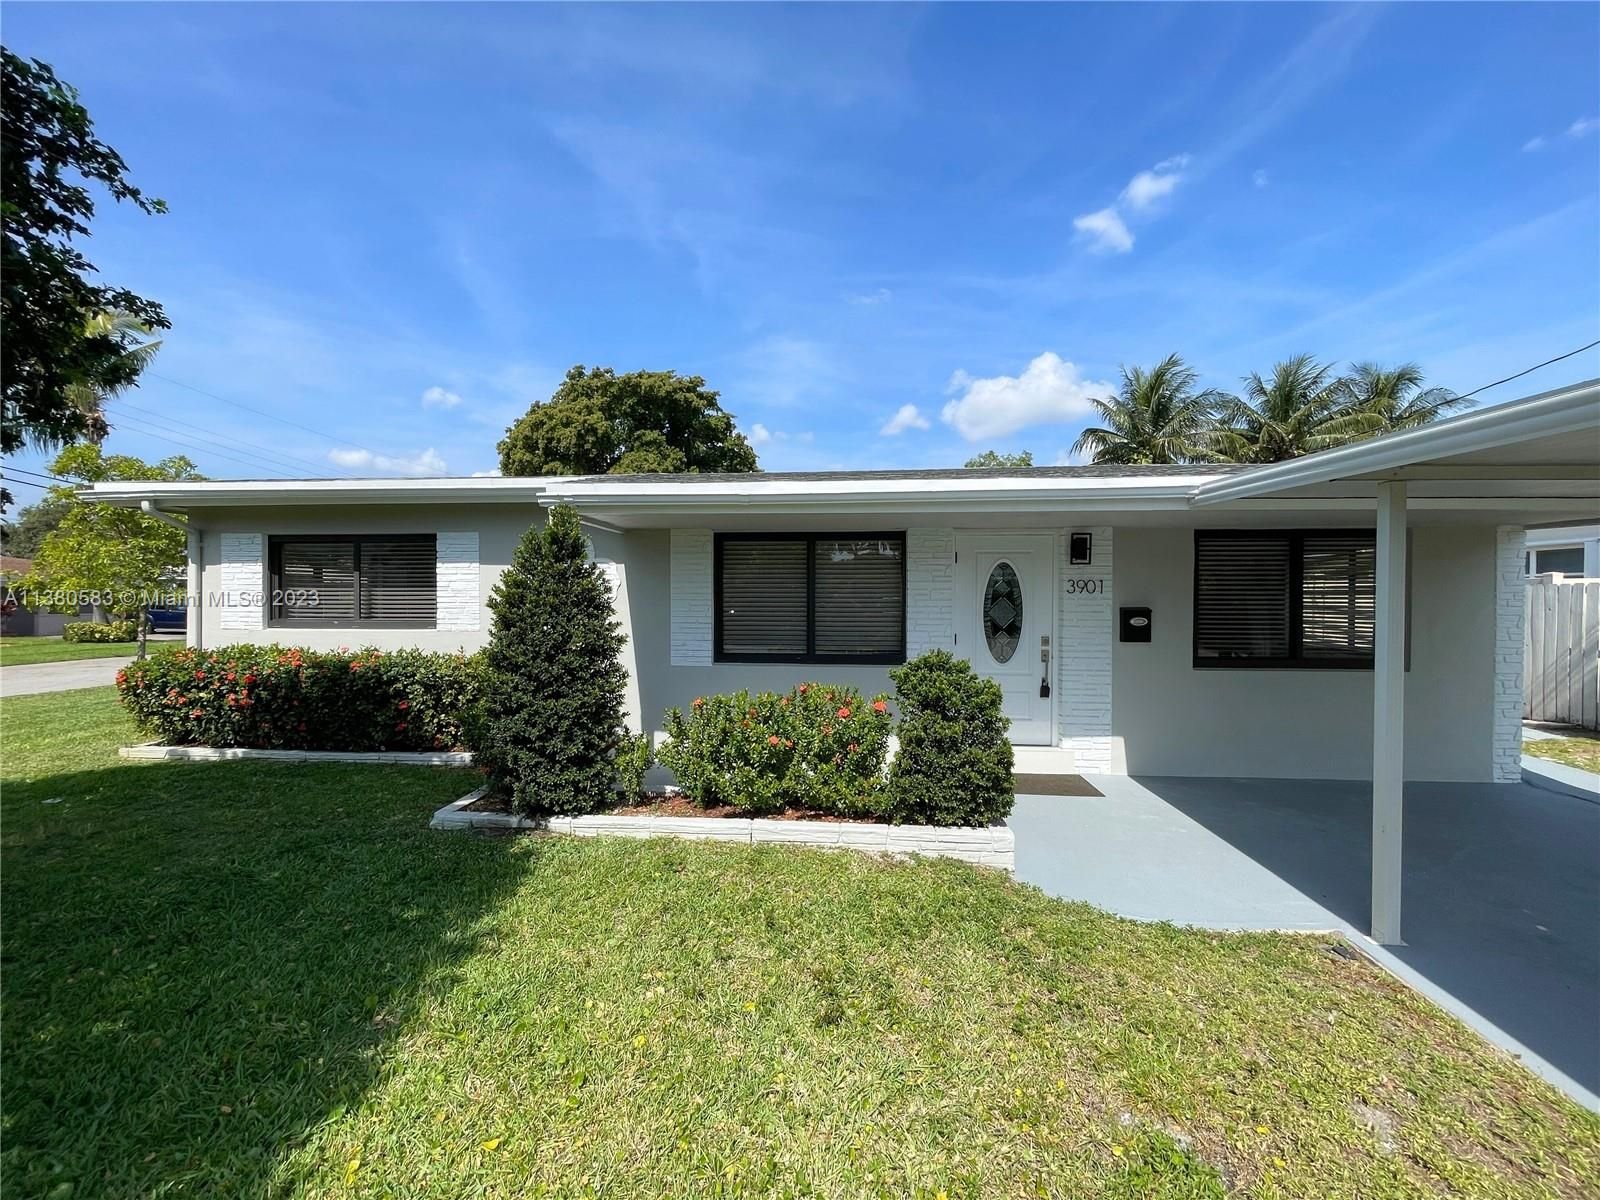 Real estate property located at 3901 1st Ter, Broward County, Oakland Park, FL